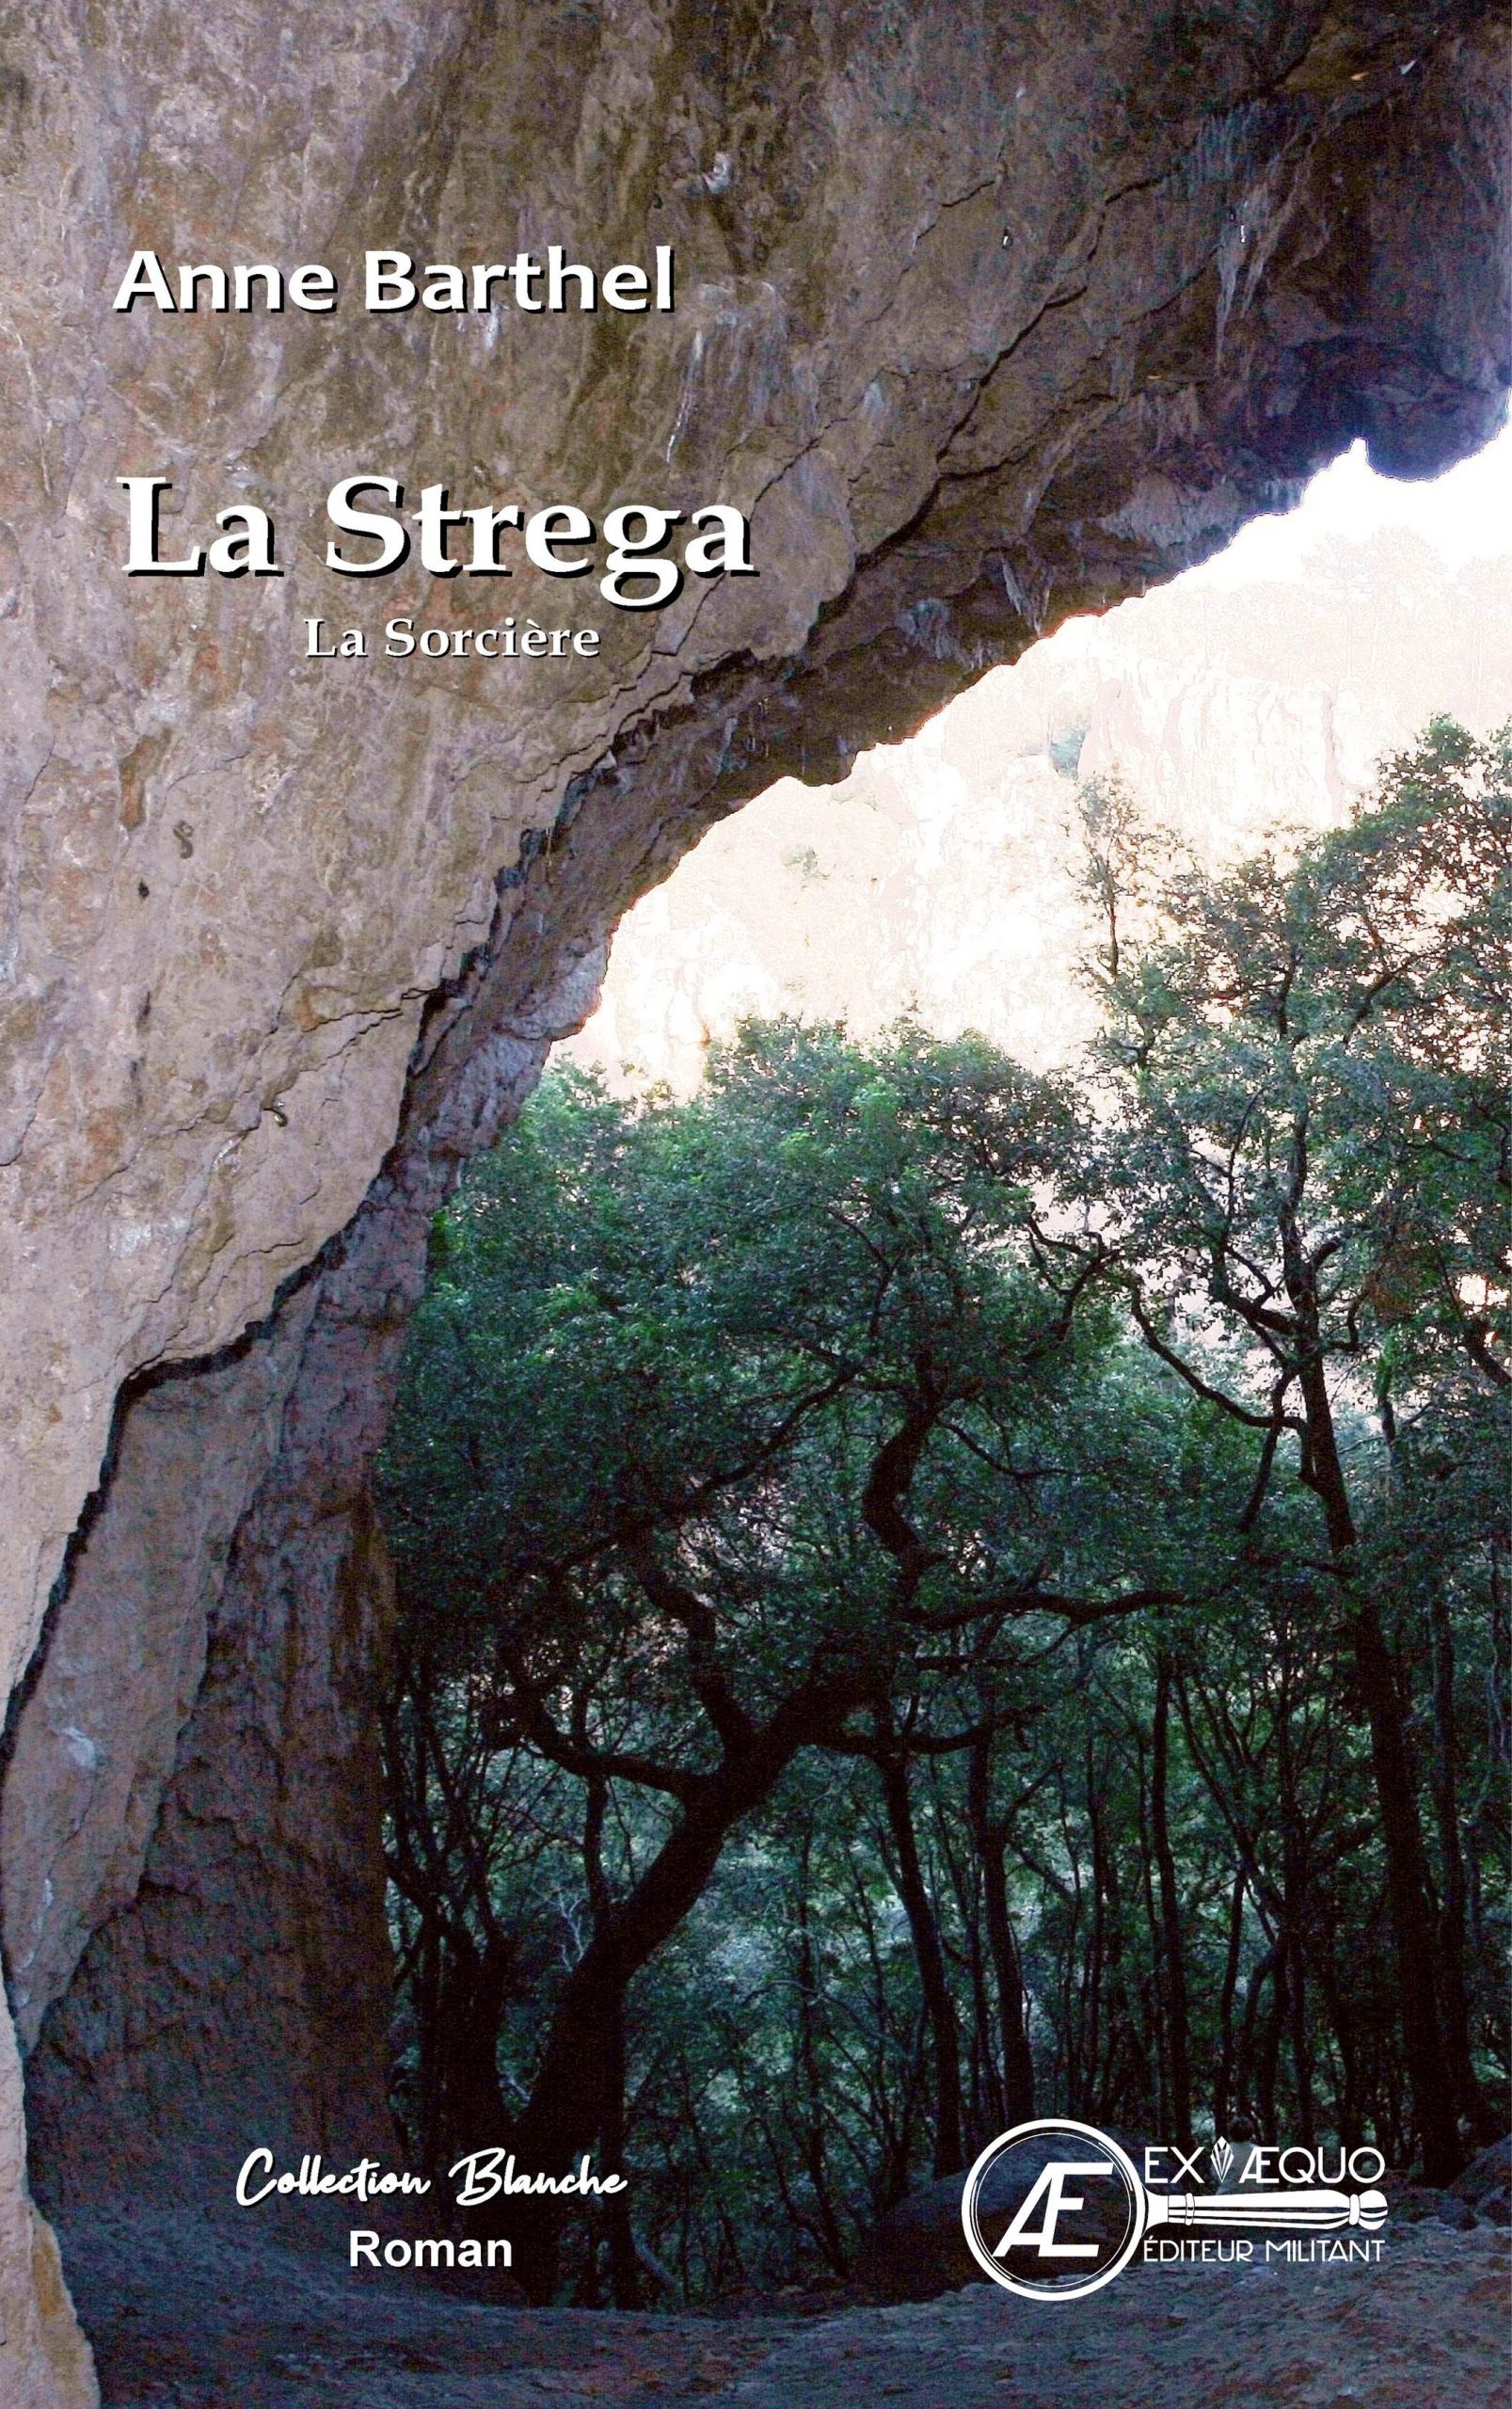 You are currently viewing La Strega, d’Anne Barthel